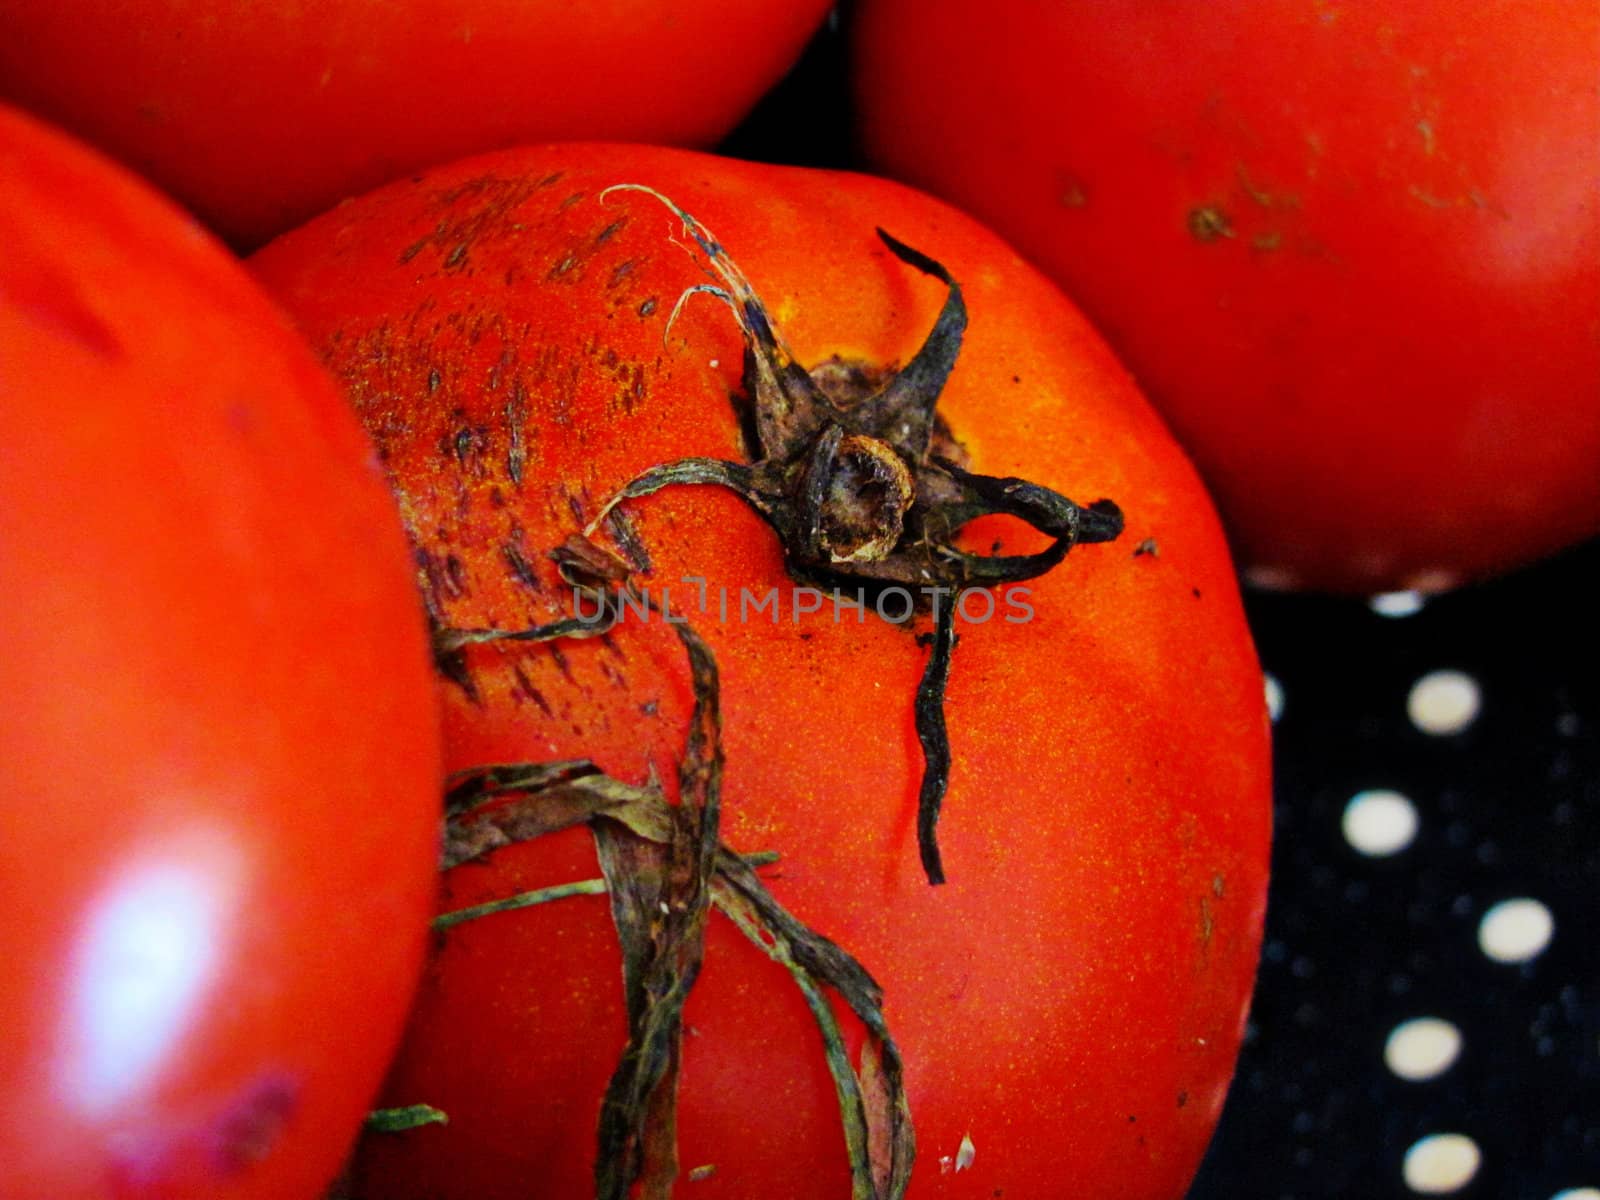 Dirty Tomato by cccaity63